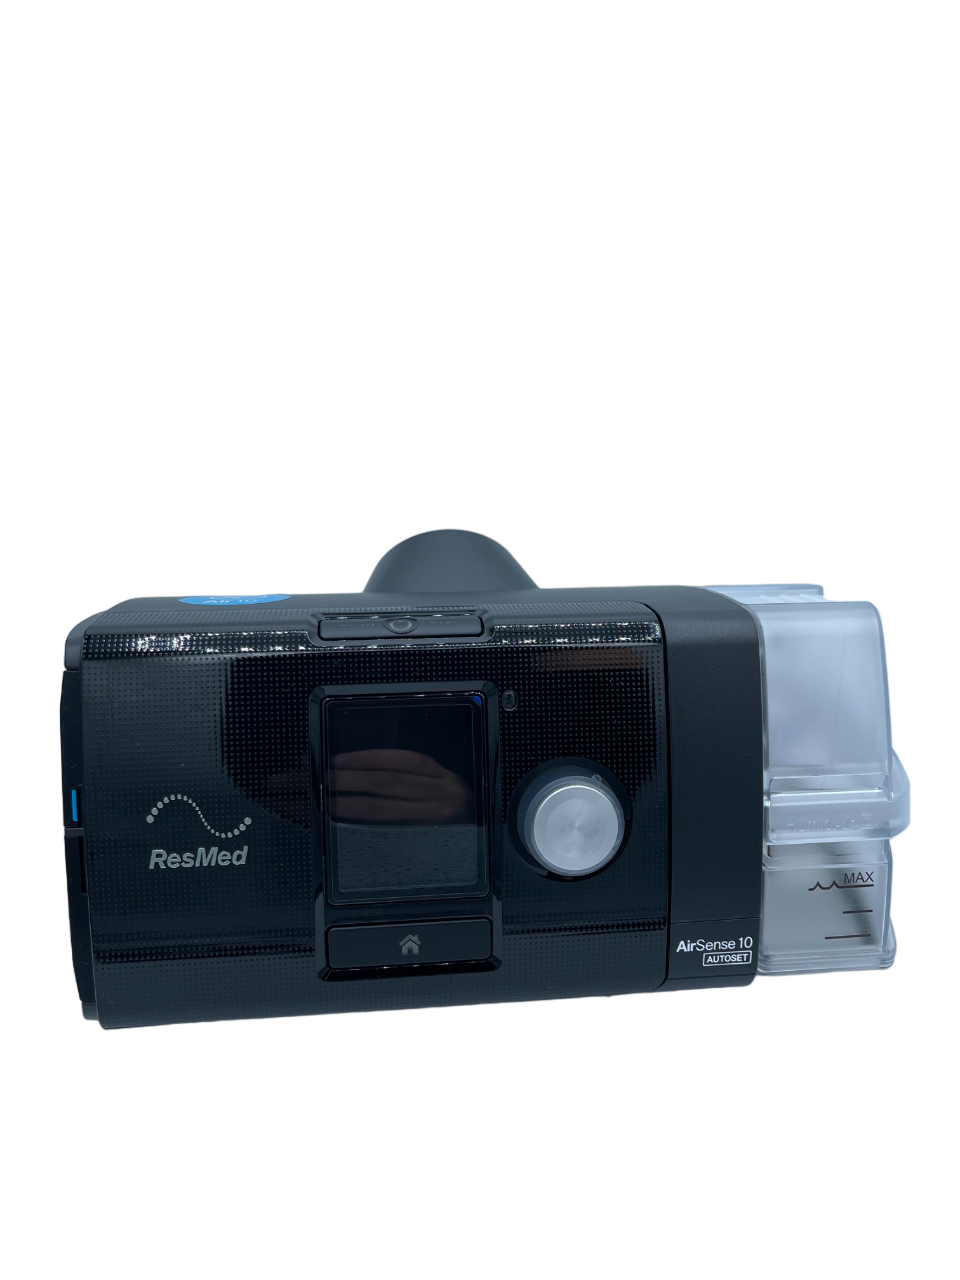 Certified Pre-Owned CPAP and BiPAP Machines